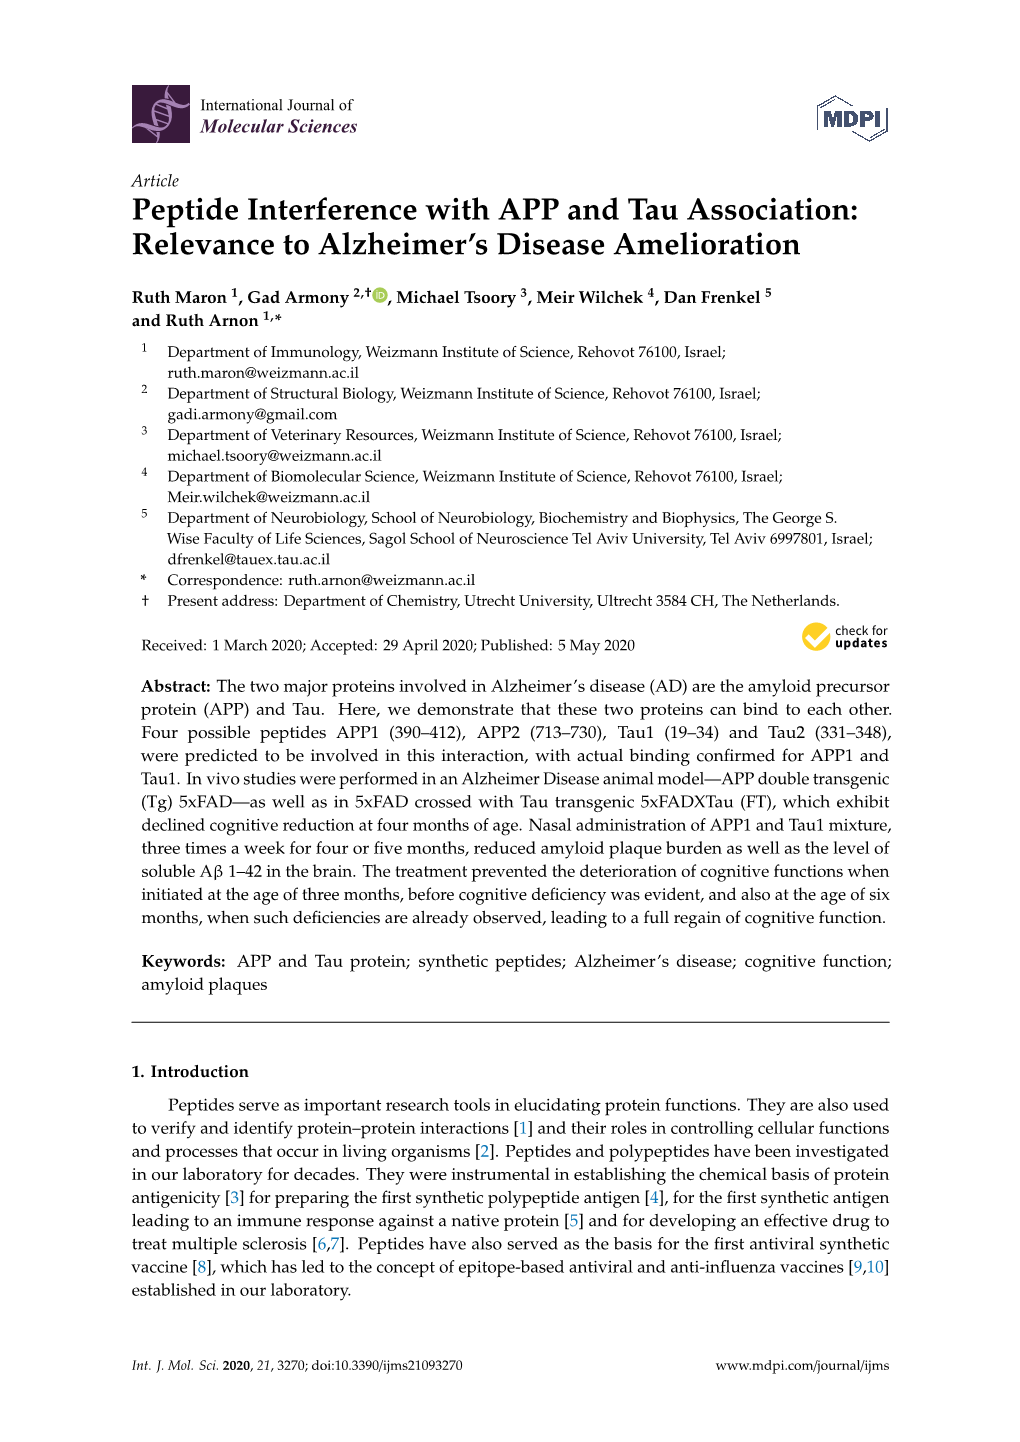 Peptide Interference with APP and Tau Association: Relevance to Alzheimer's Disease Amelioration